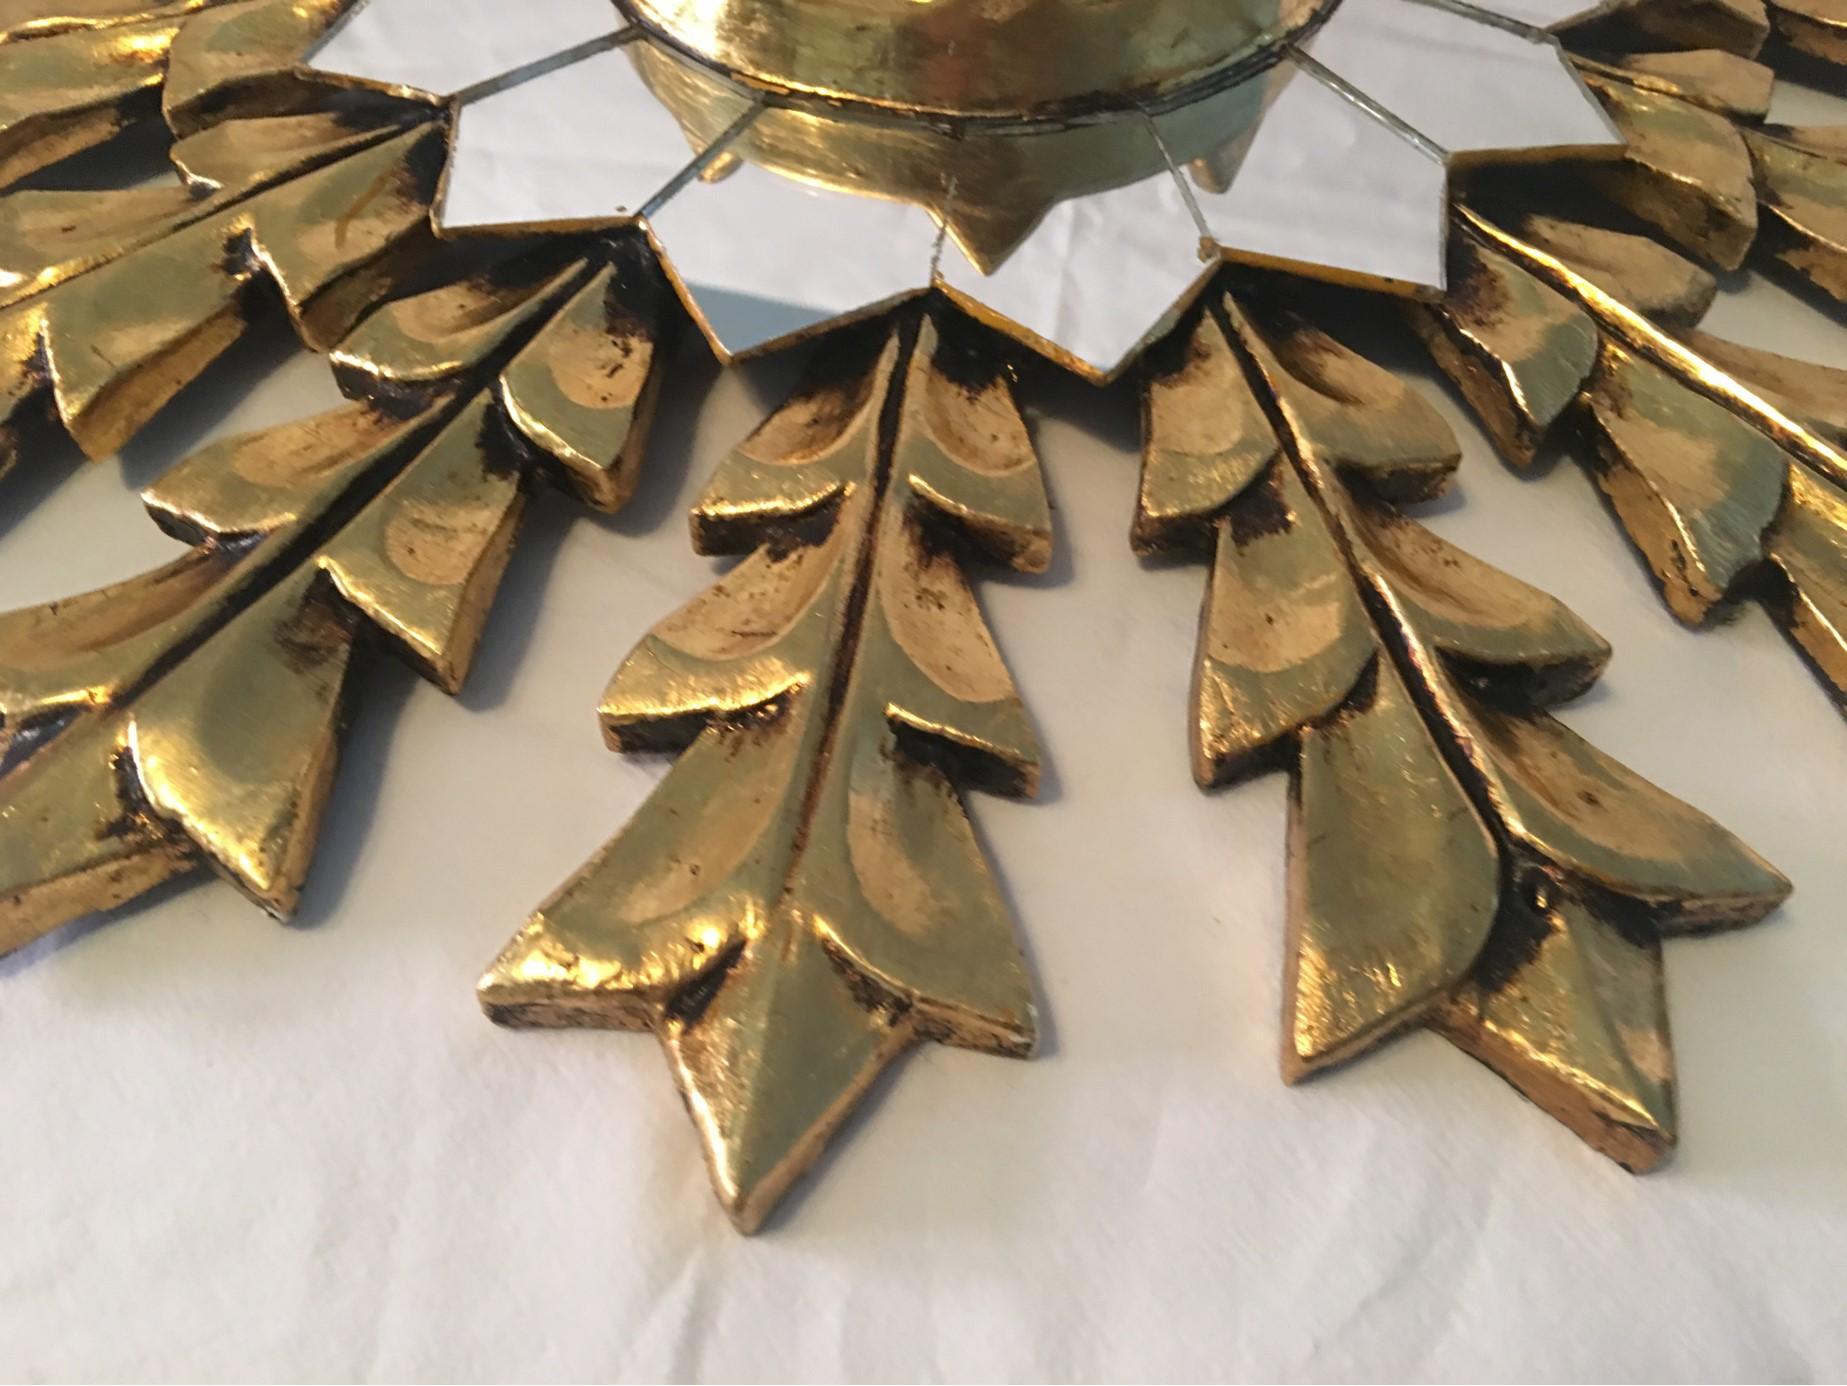 A French midcentury leaf gold on wood starburst wall mirror. Gold leafing applied by hand. Manual hand polish. Very attractive piece.
Measures: 17.5 Inches with a 2 inch depth. Will be lovingly shipped from Europe to Buyer.